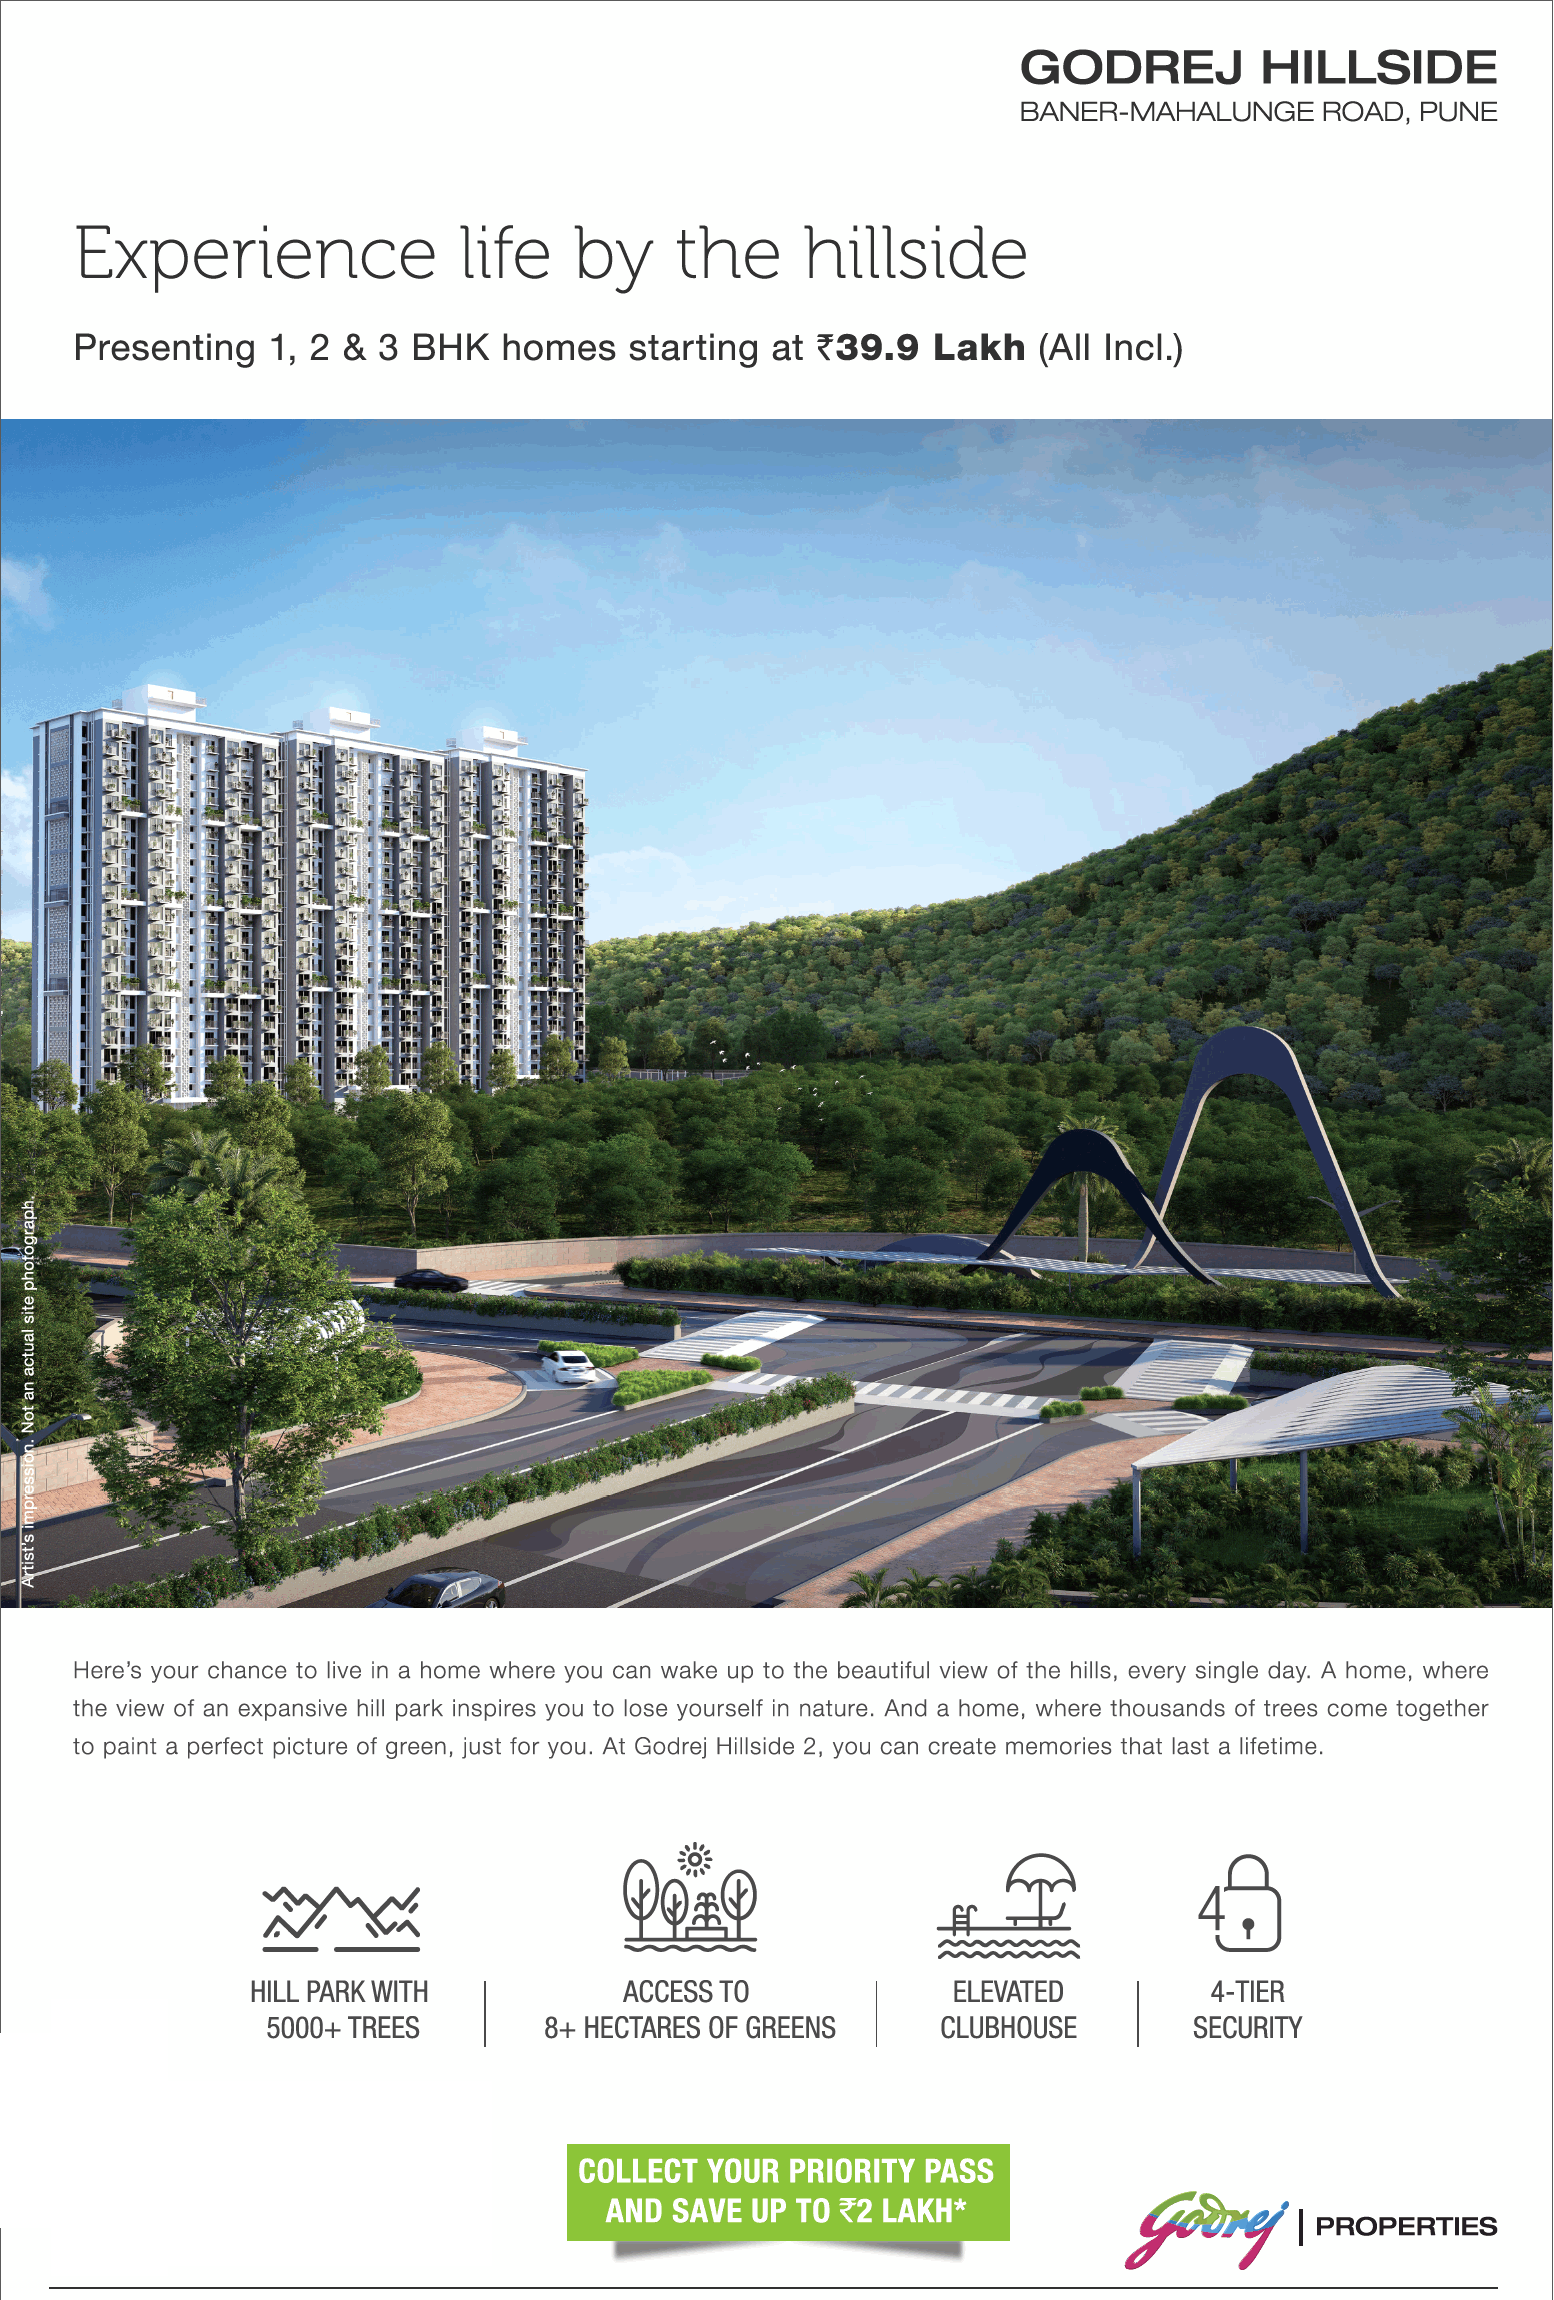 Presenting 1, 2 and 3 BHK homes starting at Rs 39.9 Lakh at Godrej Hillside in Pune